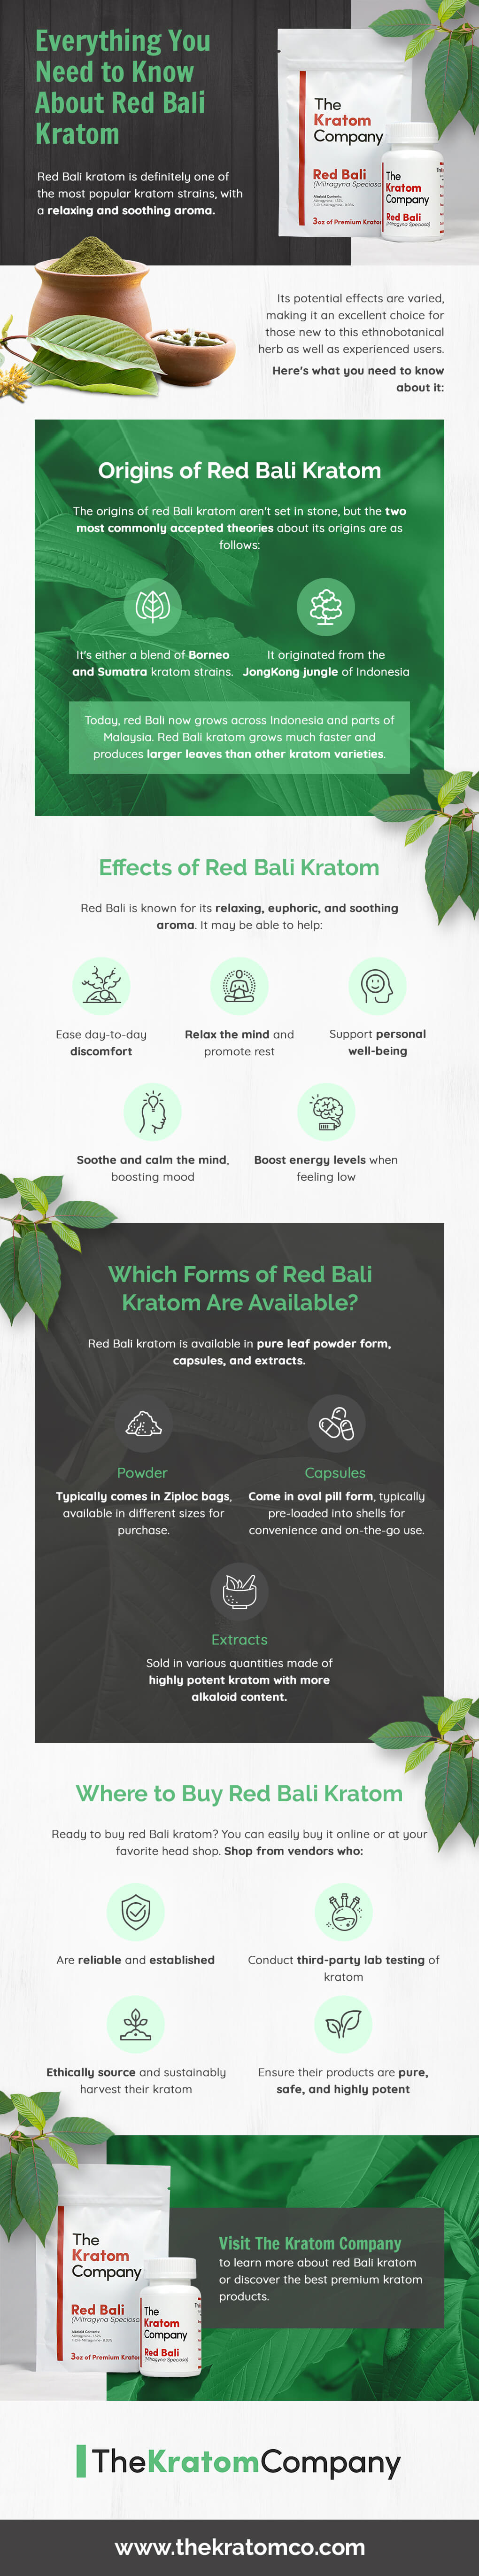 Infographic Everything You Need To Know About Red Bali Kratom